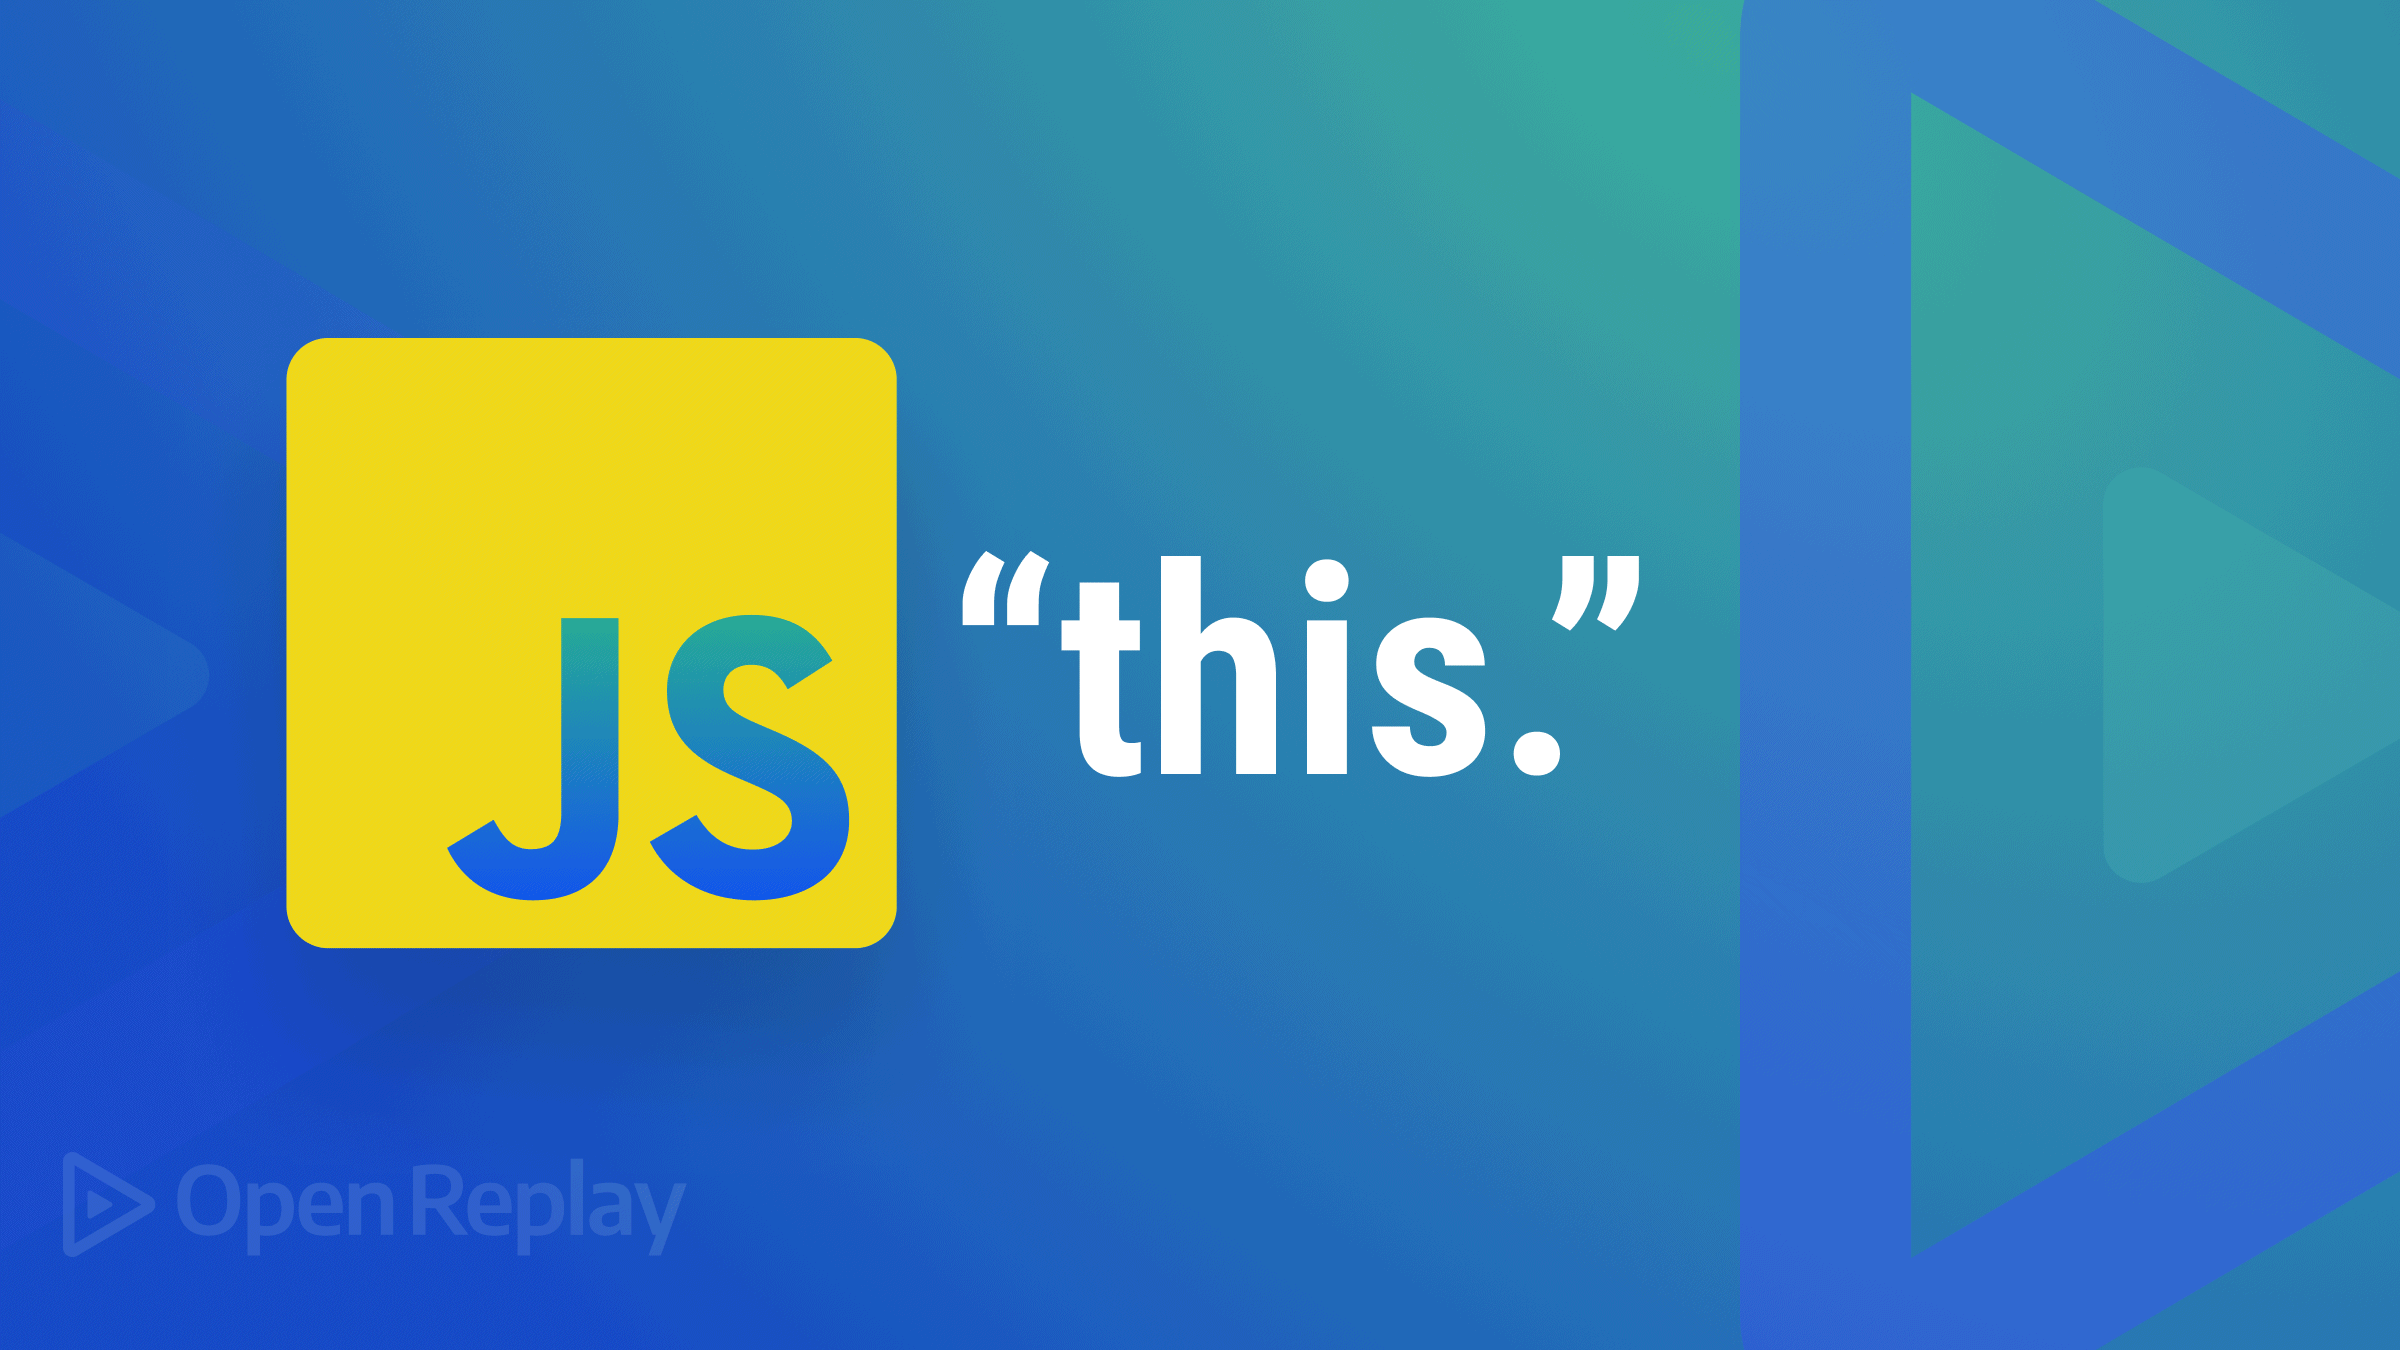 JavaScript's 'this' keyword explained and demystified